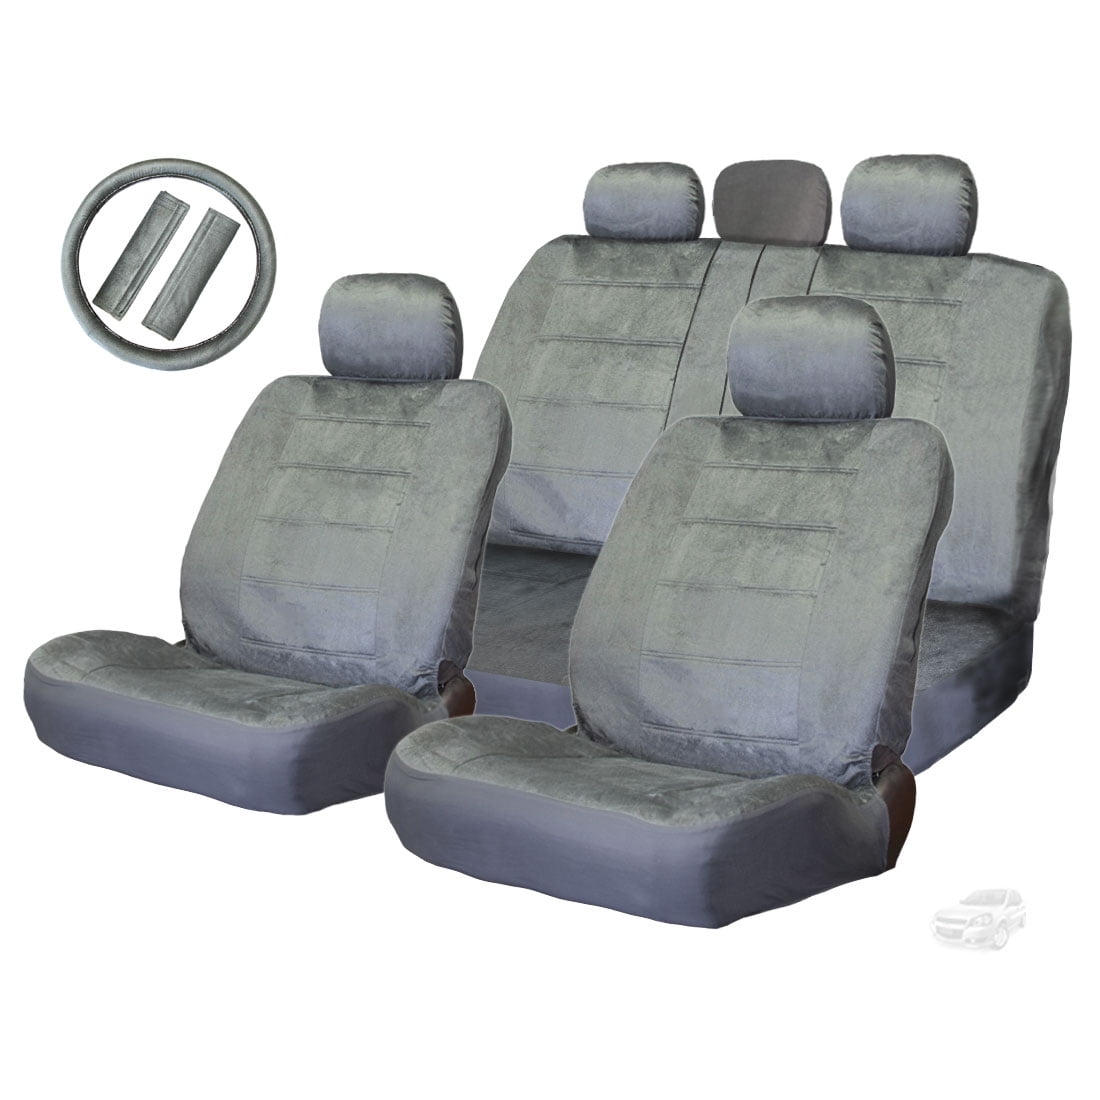 Airbag Safe Full Set Fabric Velour Seat Covers/Protectors Grey/Black For Toyota